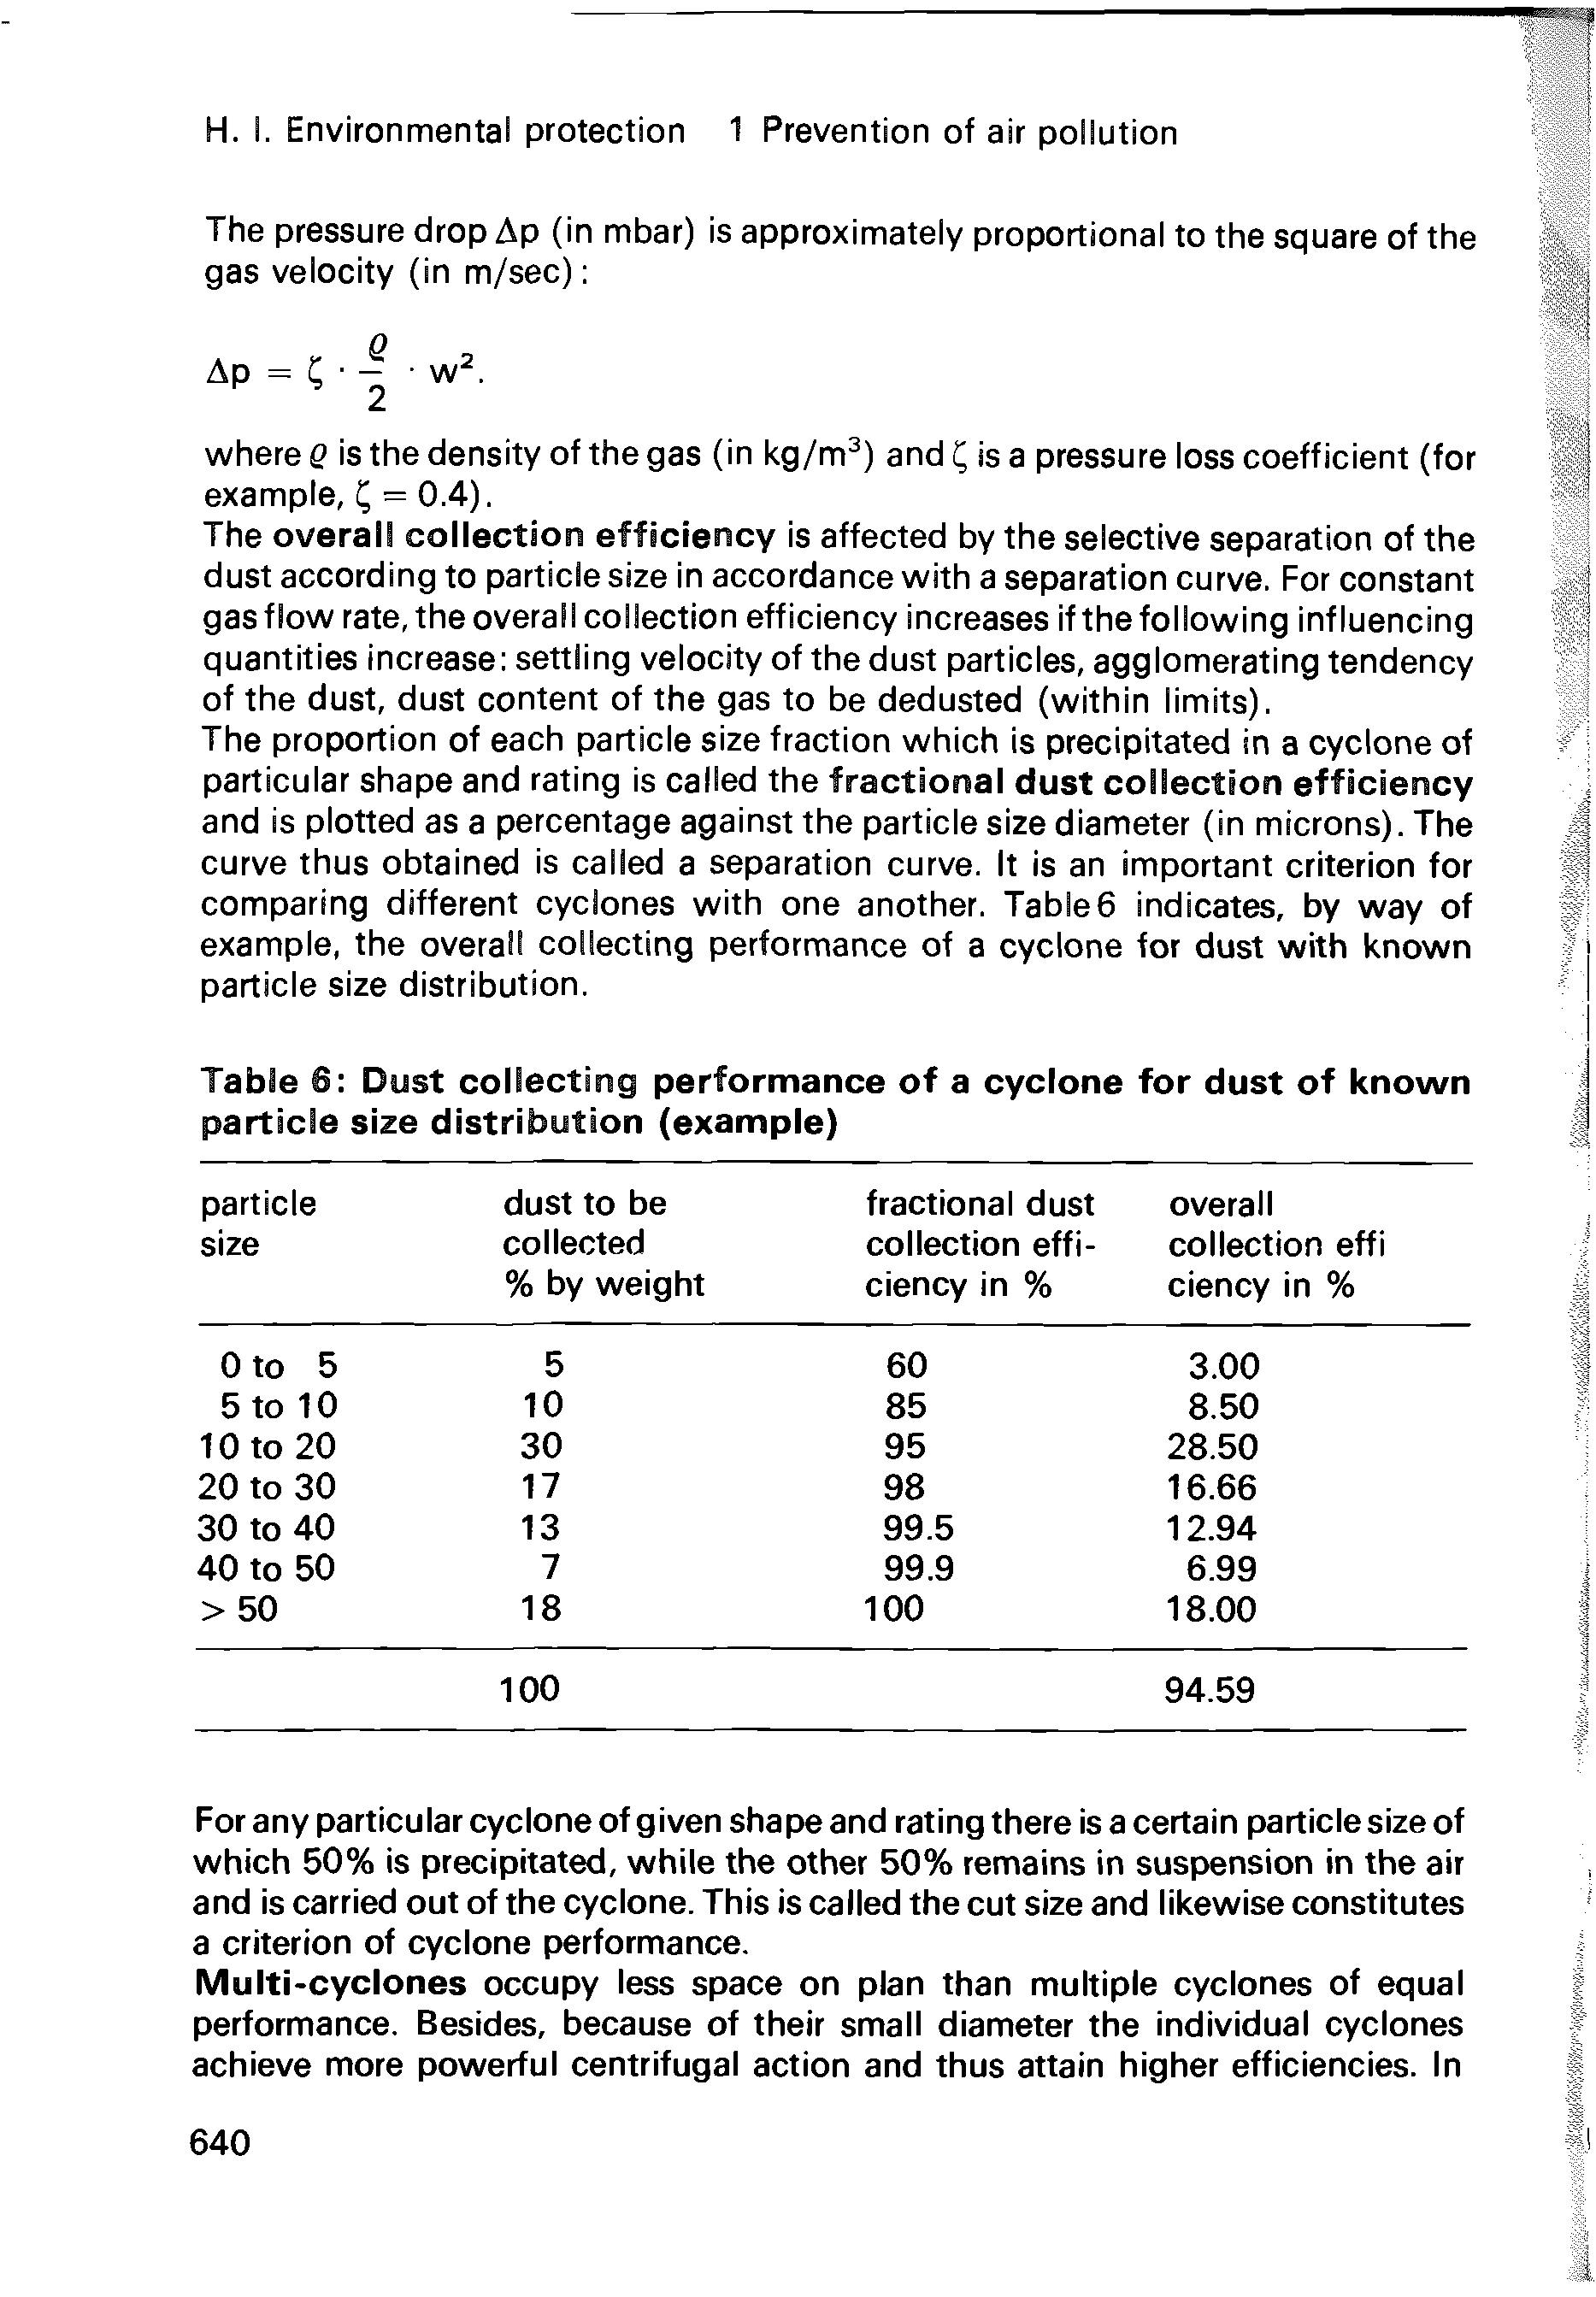 Table 6 Dust collecting performance of a cyclone for dust of known particle size distribution (example)...